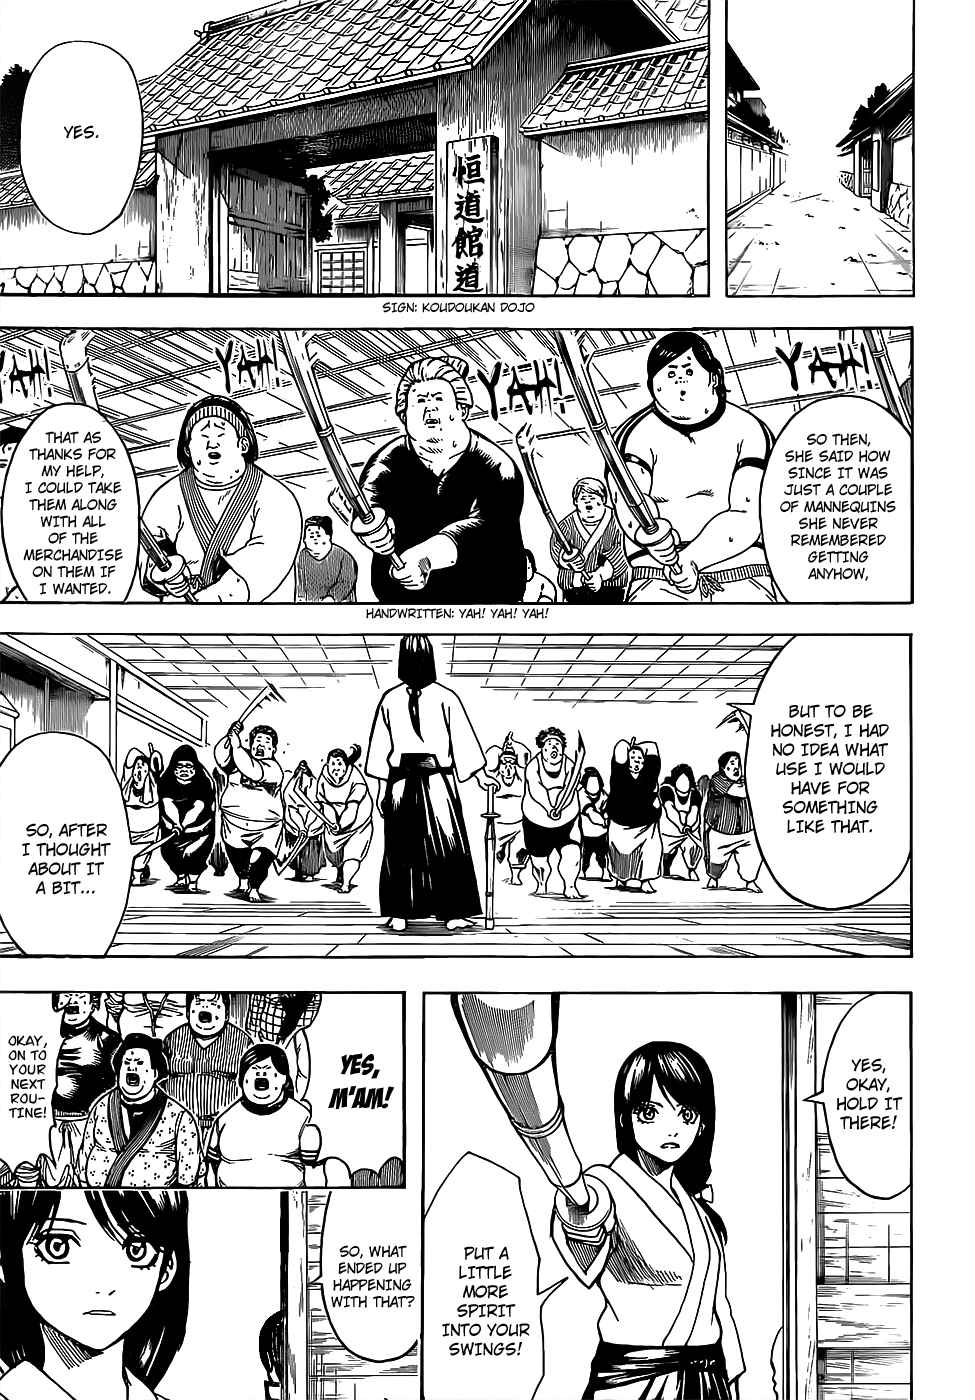 Gintama Vol. 76 Ch. 684 The Trick to Dieting is to not Always Strain Yourself, So...